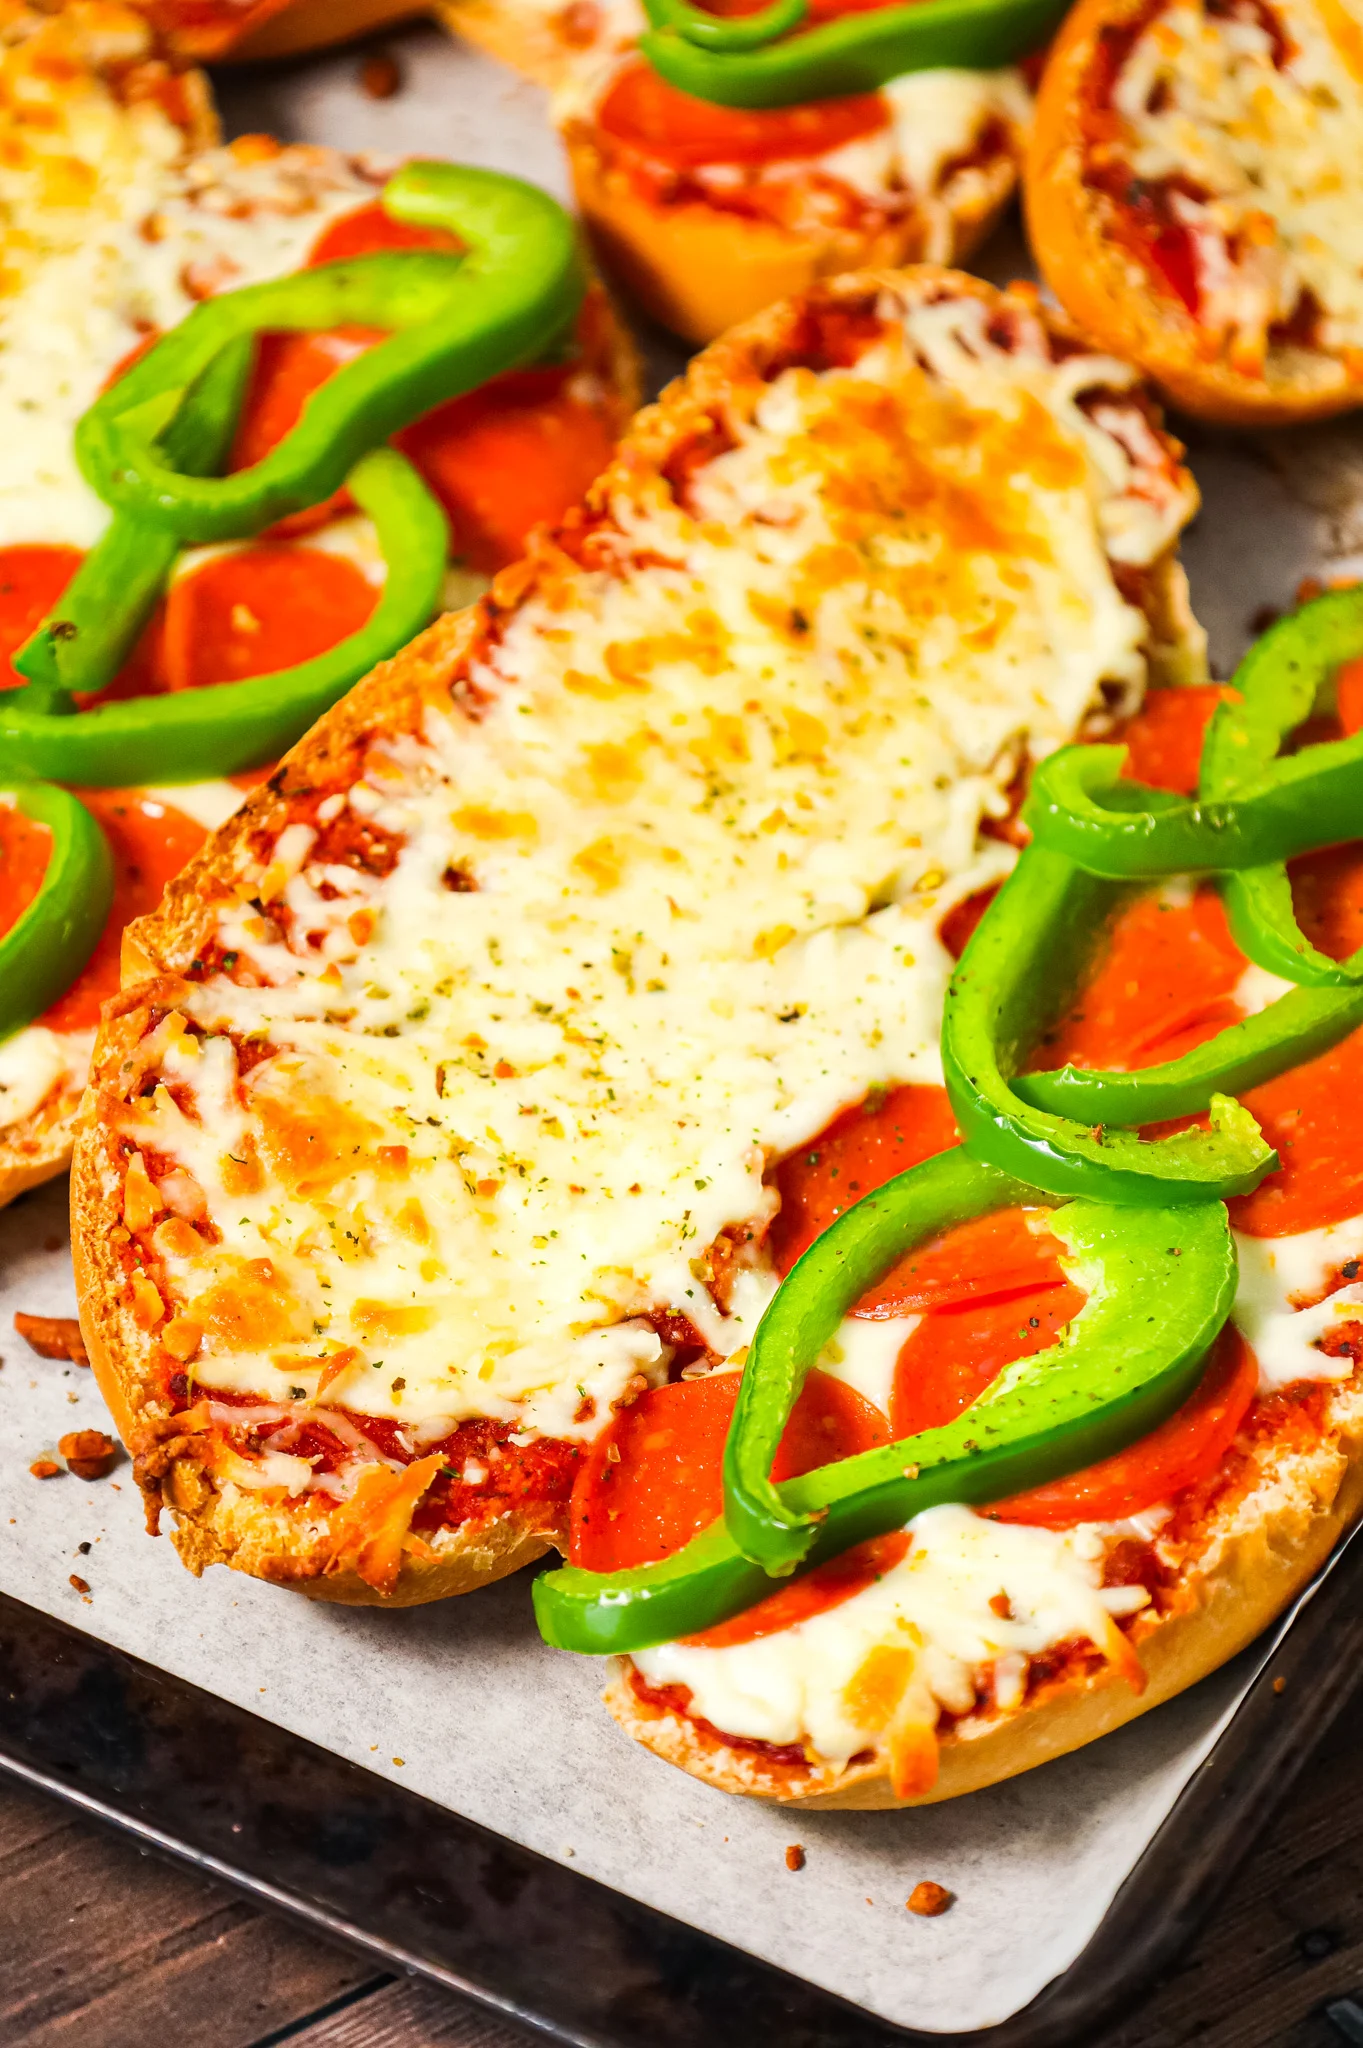 Pizza Subs are an easy weeknight dinner recipe using 9 inch sub rolls loaded with pizza sauce, mozzarella cheese, pepperoni and green peppers and then baked until perfectly toasted.